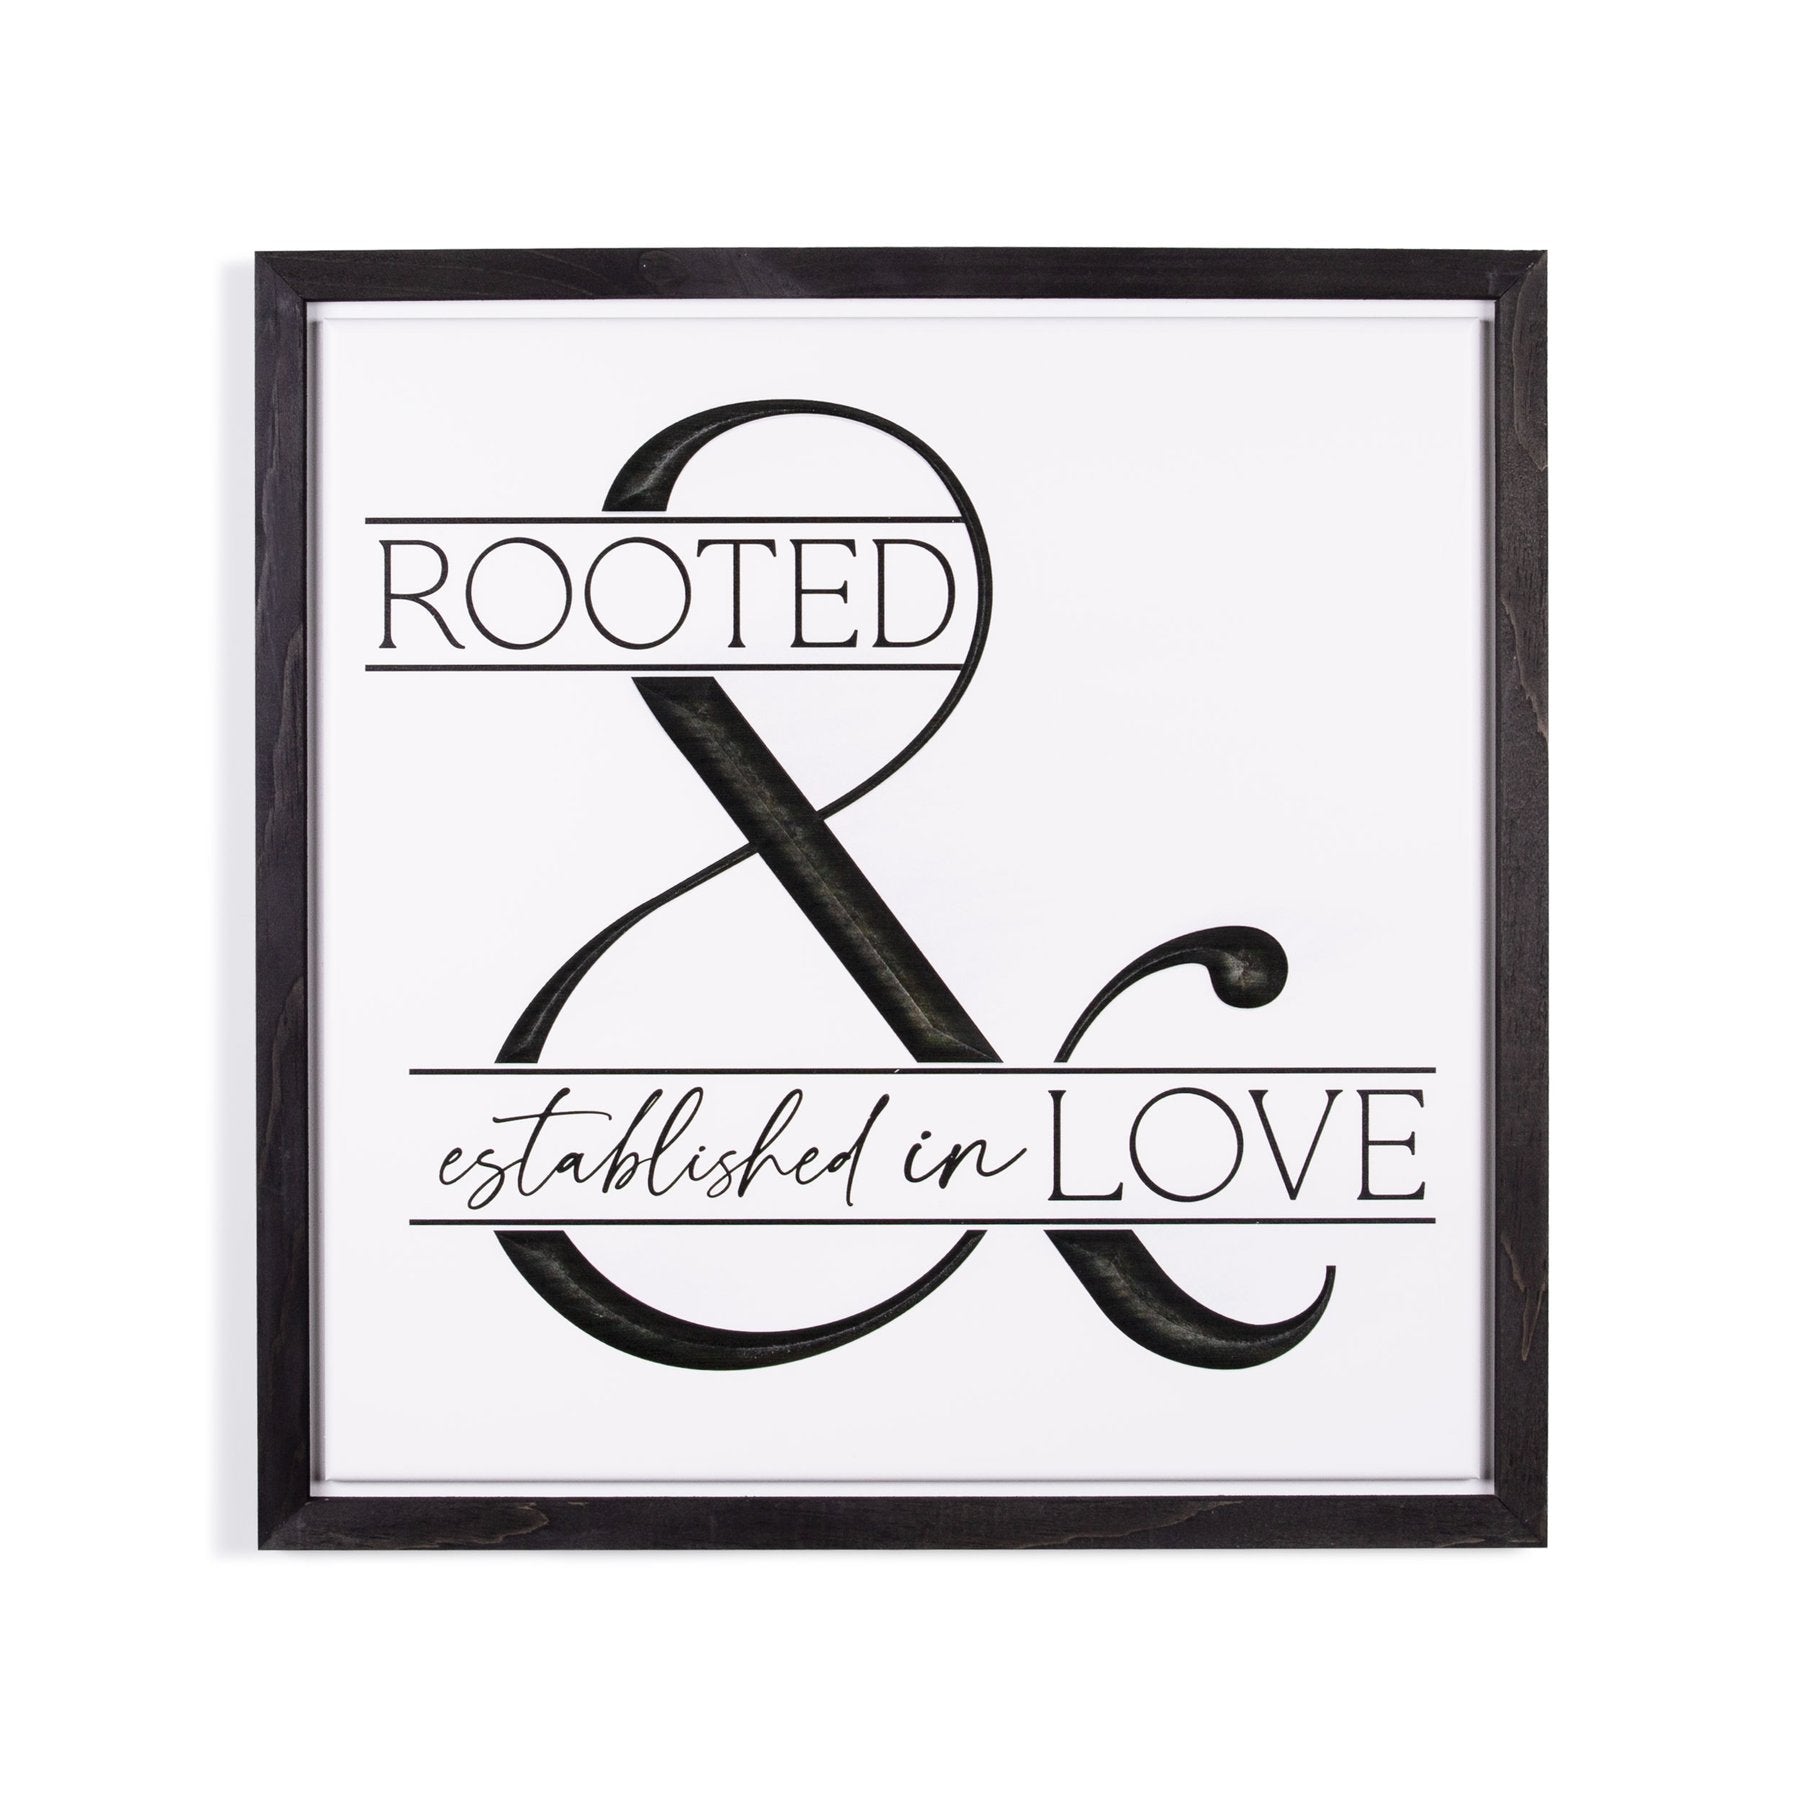 Rooted and Established in Love Framed Art